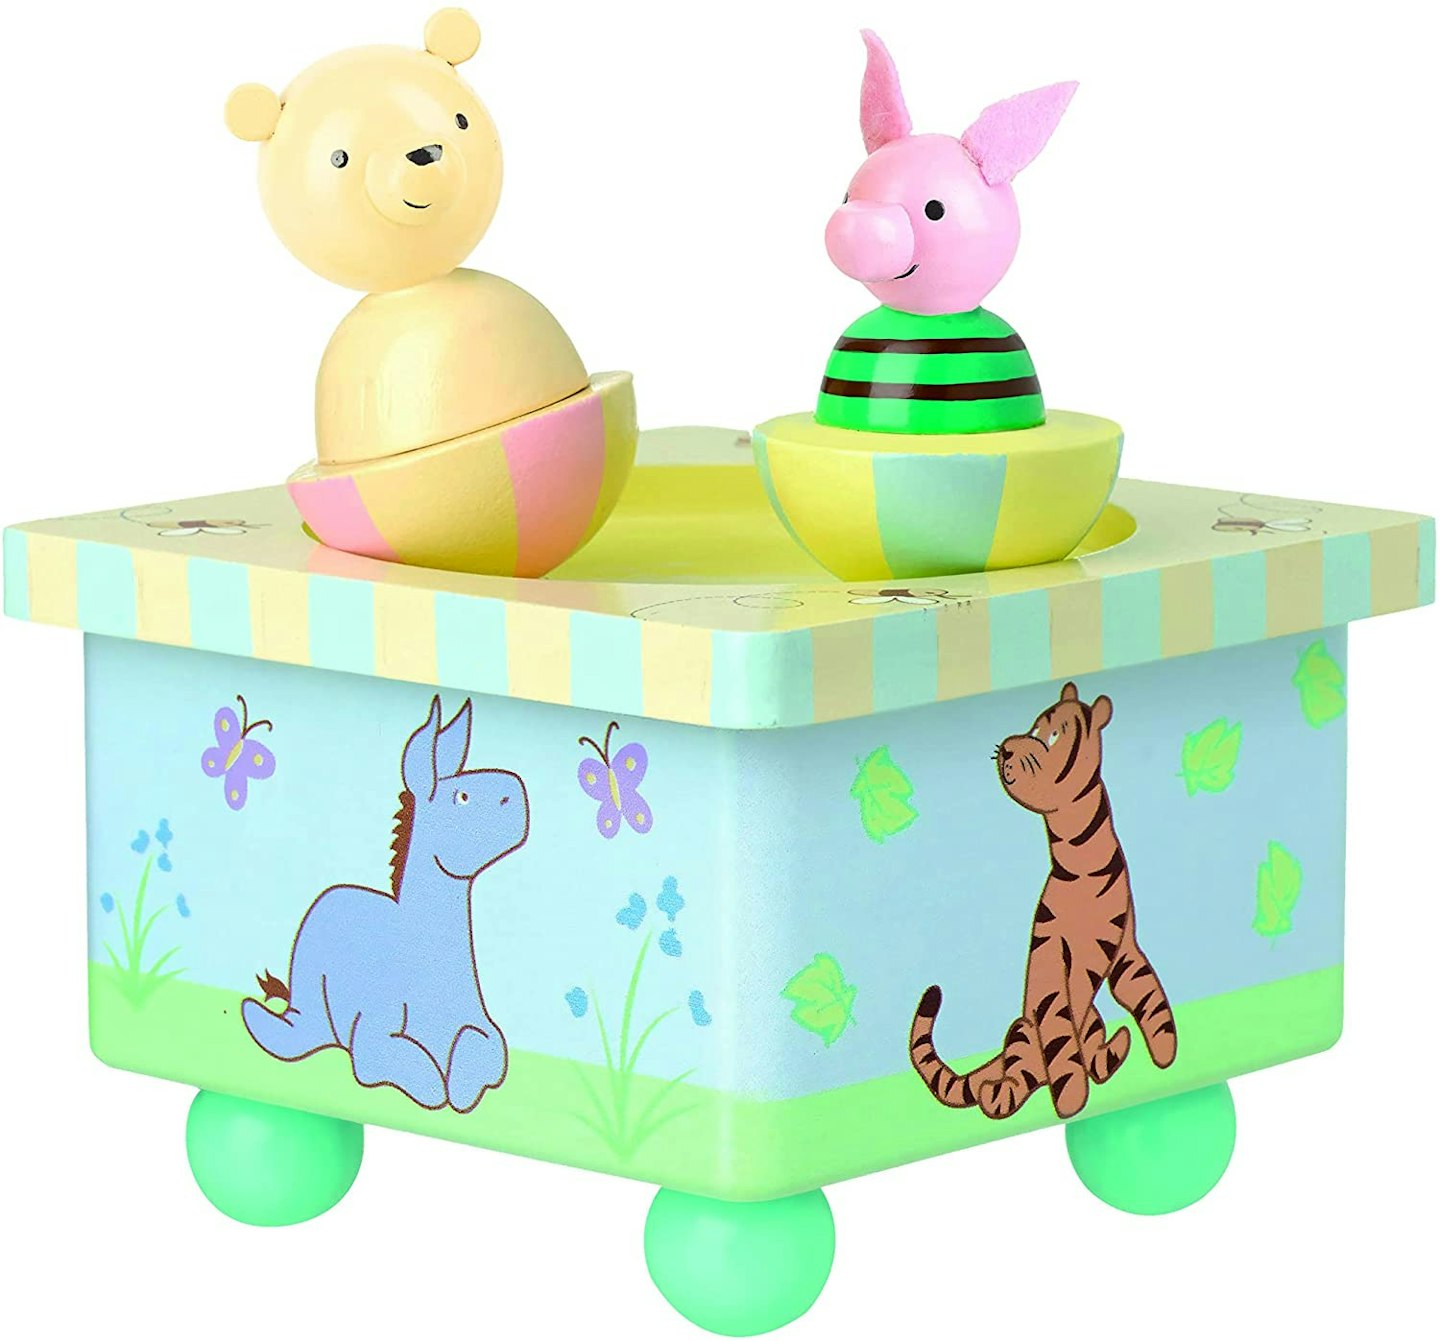 Classic Winnie The Pooh Toys Wooden Music Box